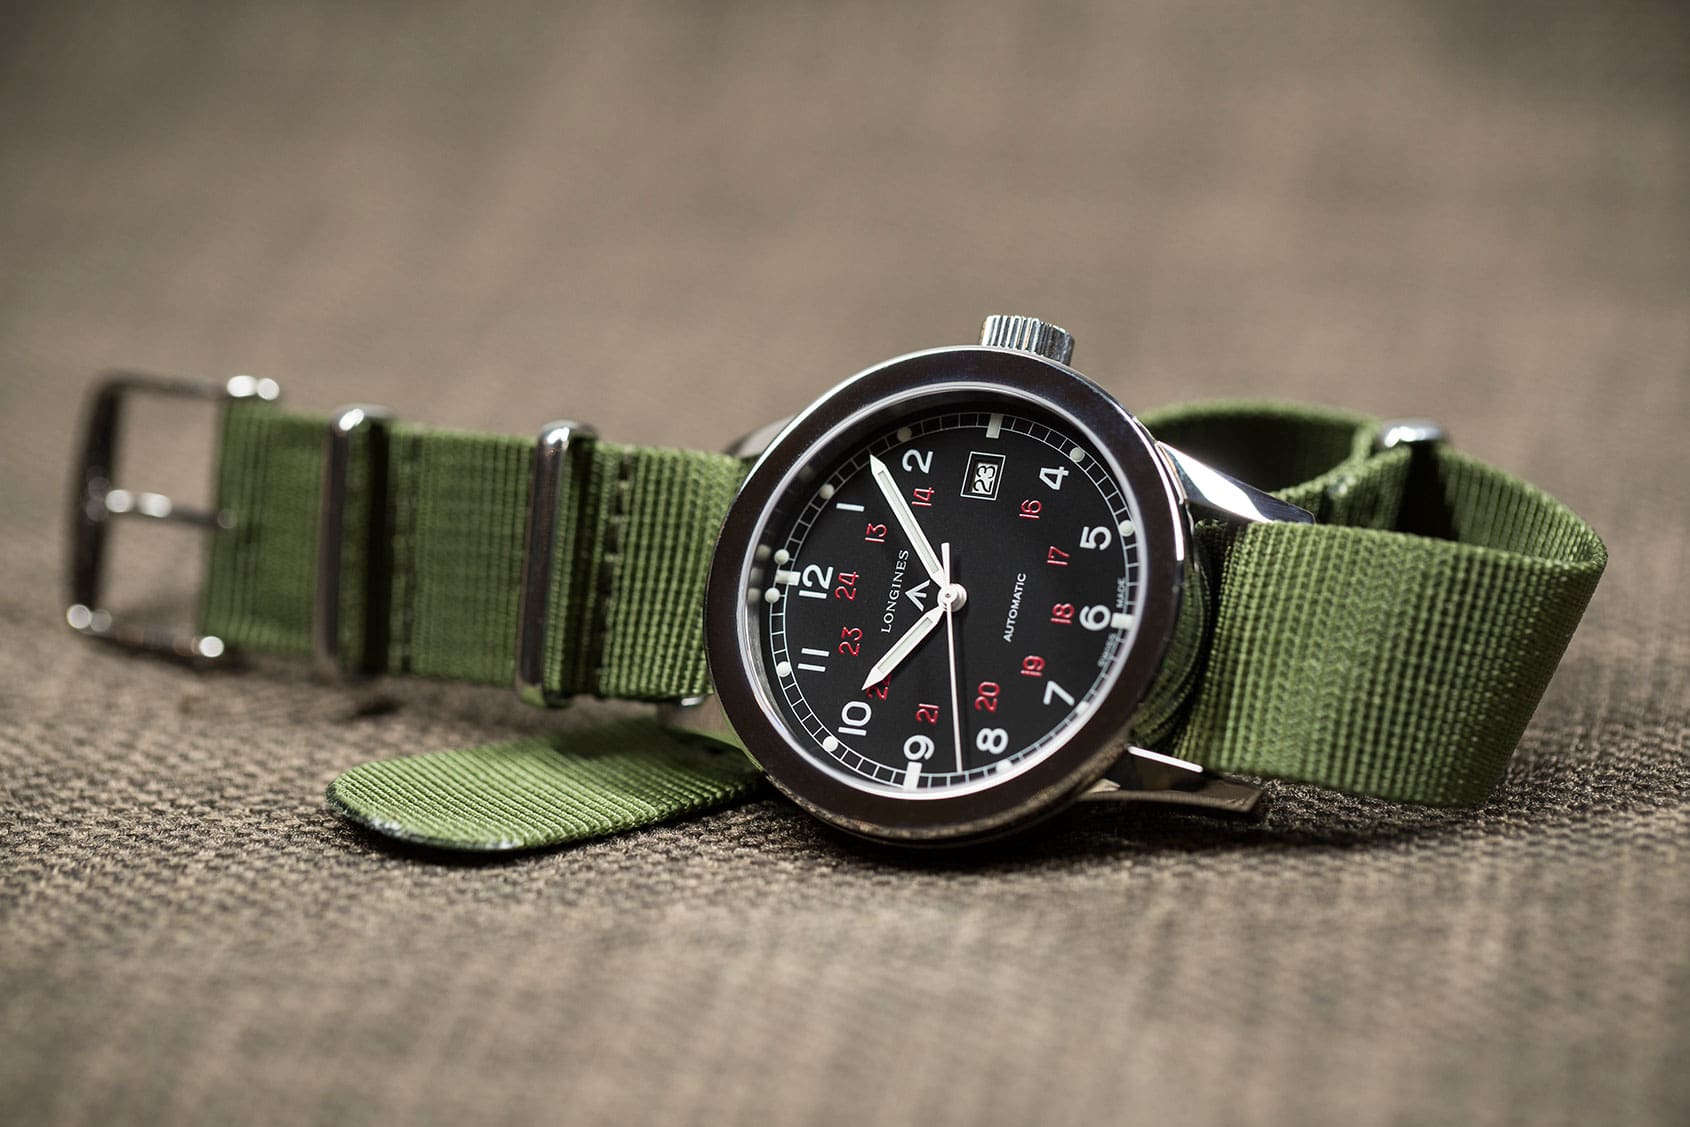 GONE IN 60 SECONDS: Presenting for duty – the Longines Heritage Military COSD video review